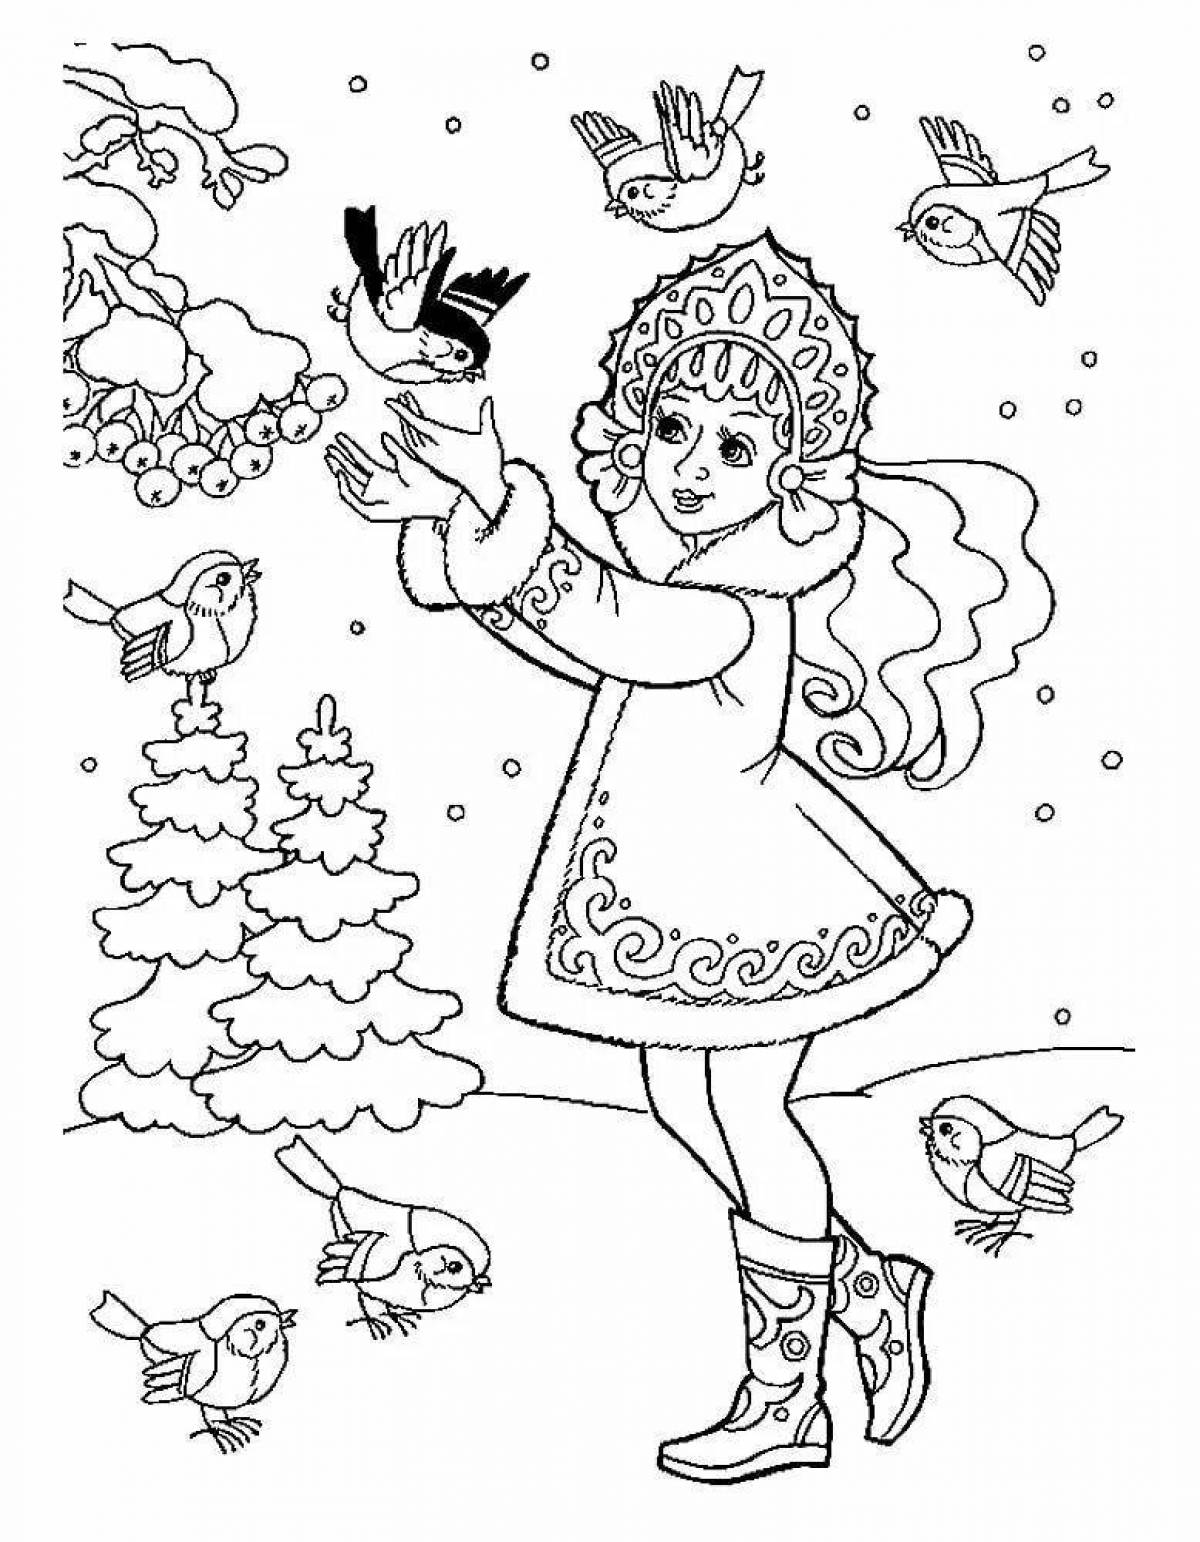 Graceful coloring drawing of a snow maiden